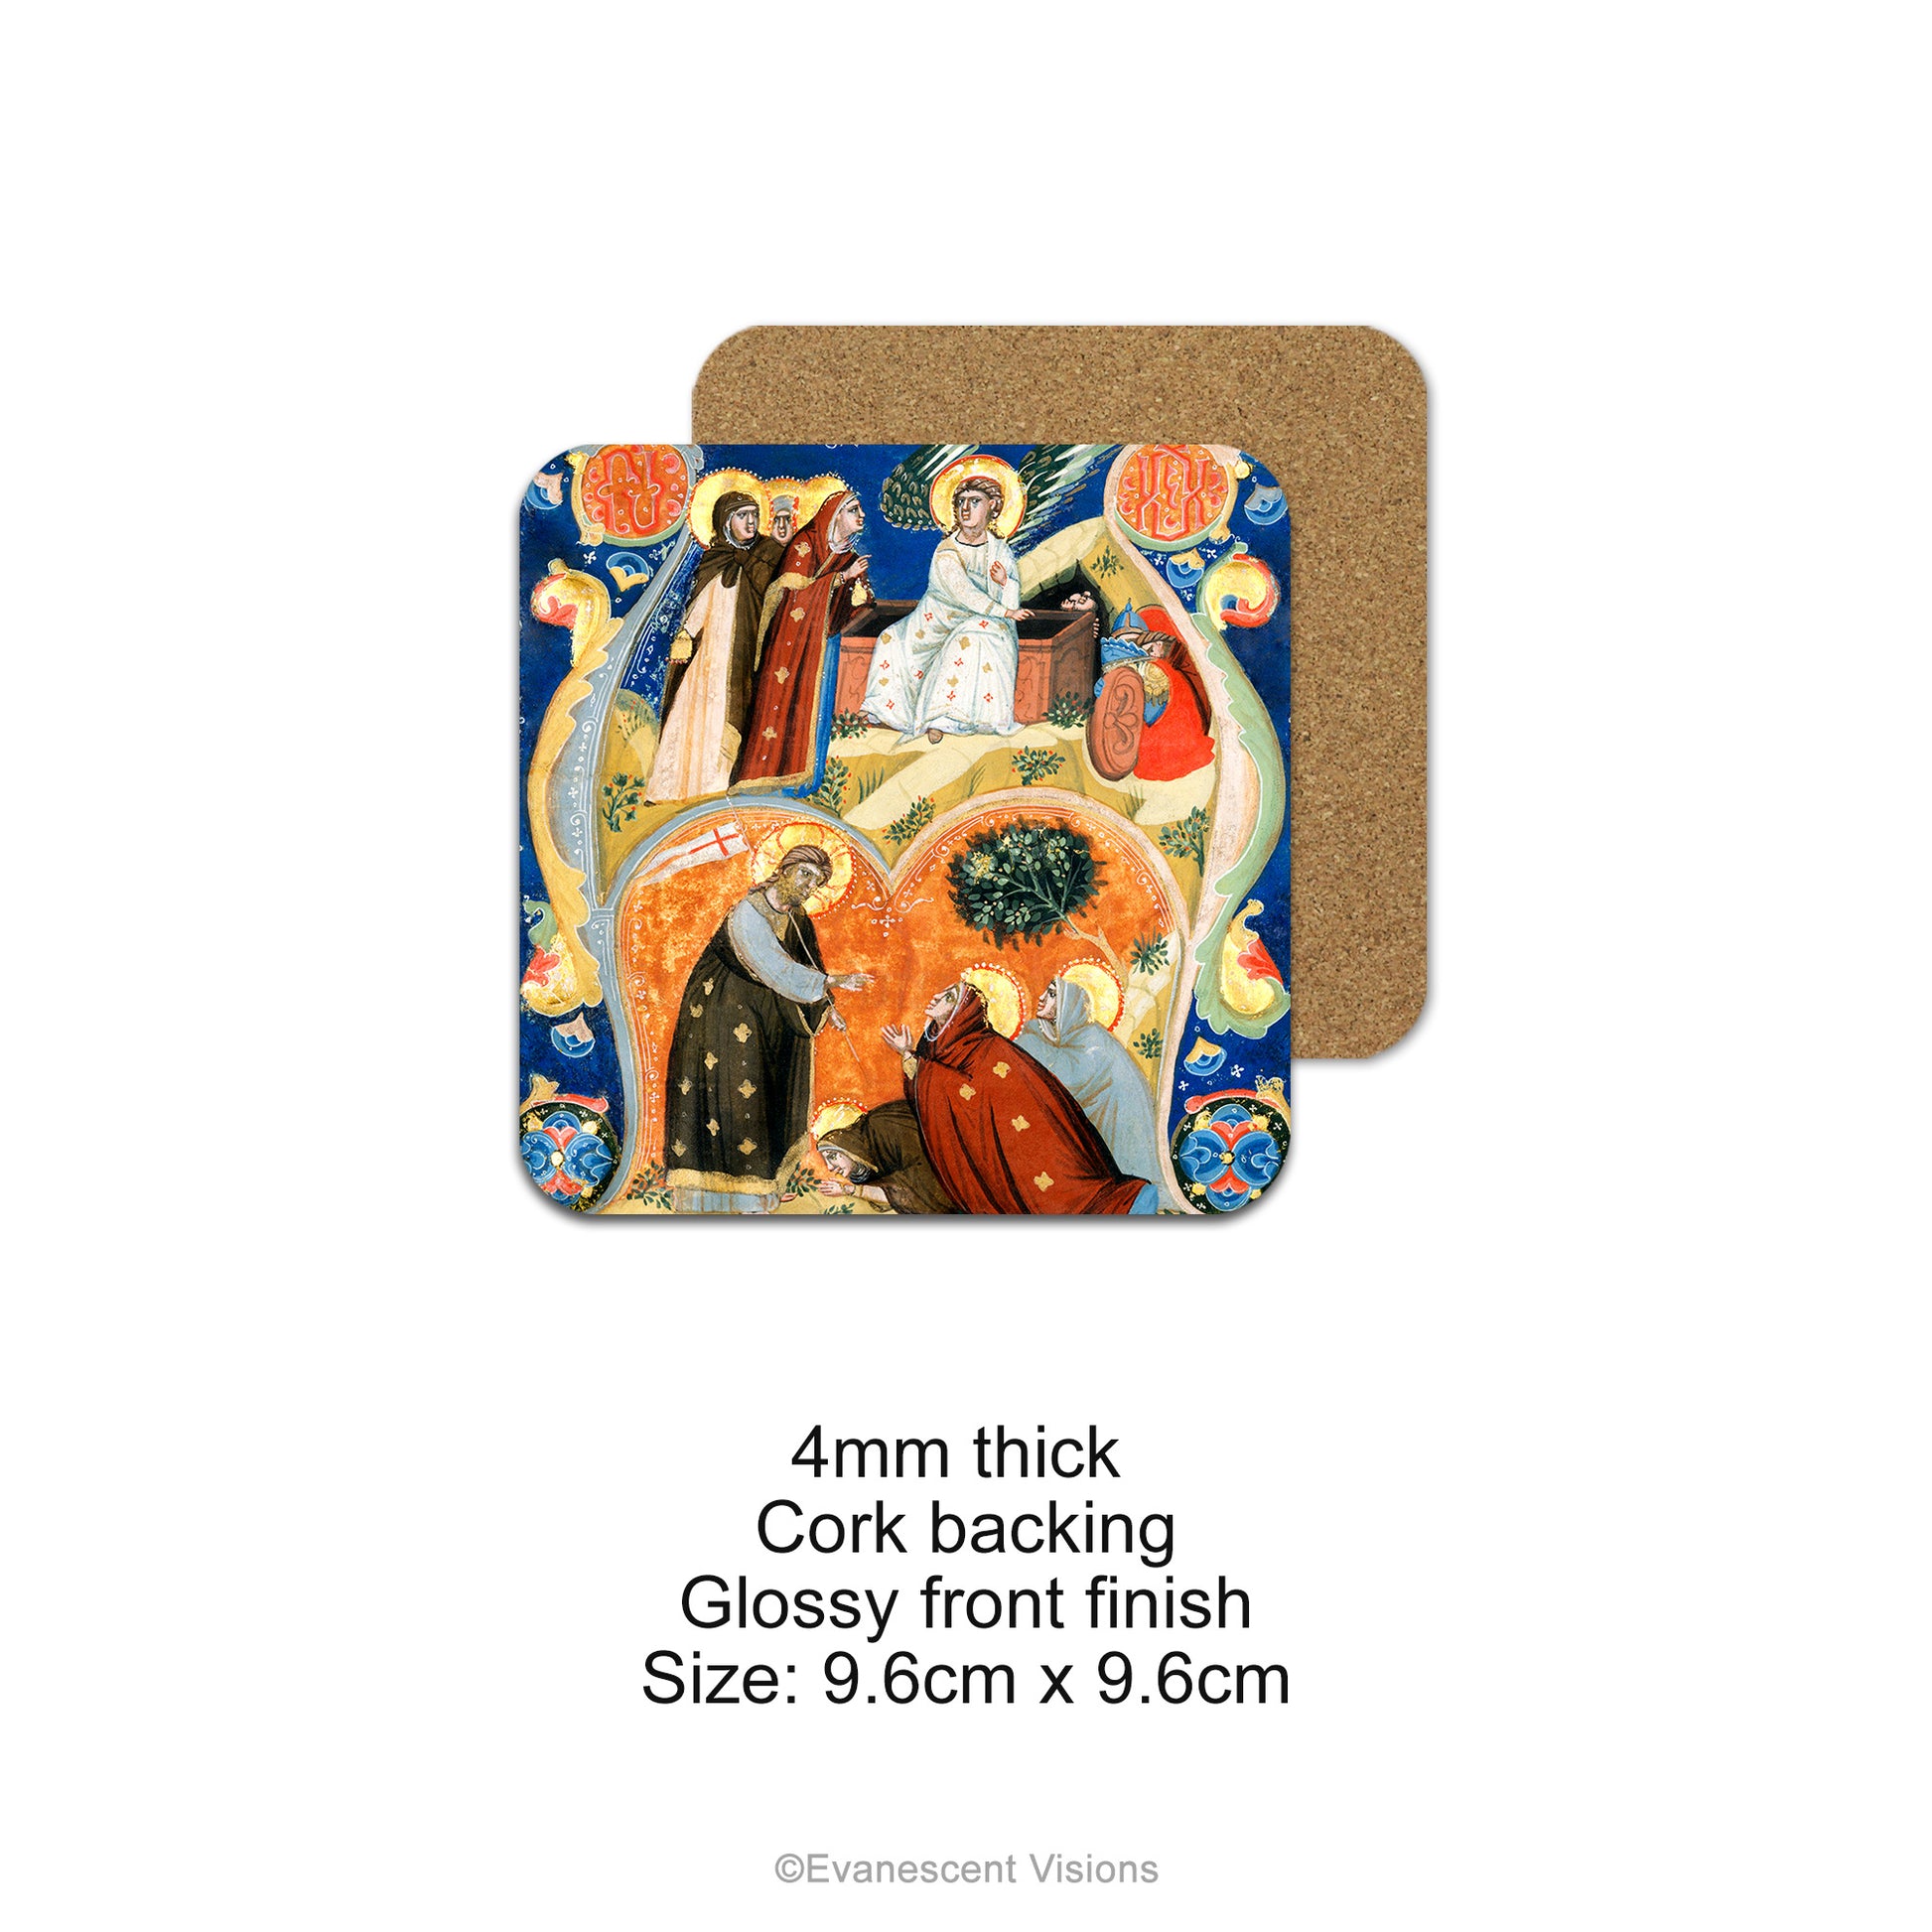 Single Medieval Illumination Coaster shown with protective cork backing and product details.